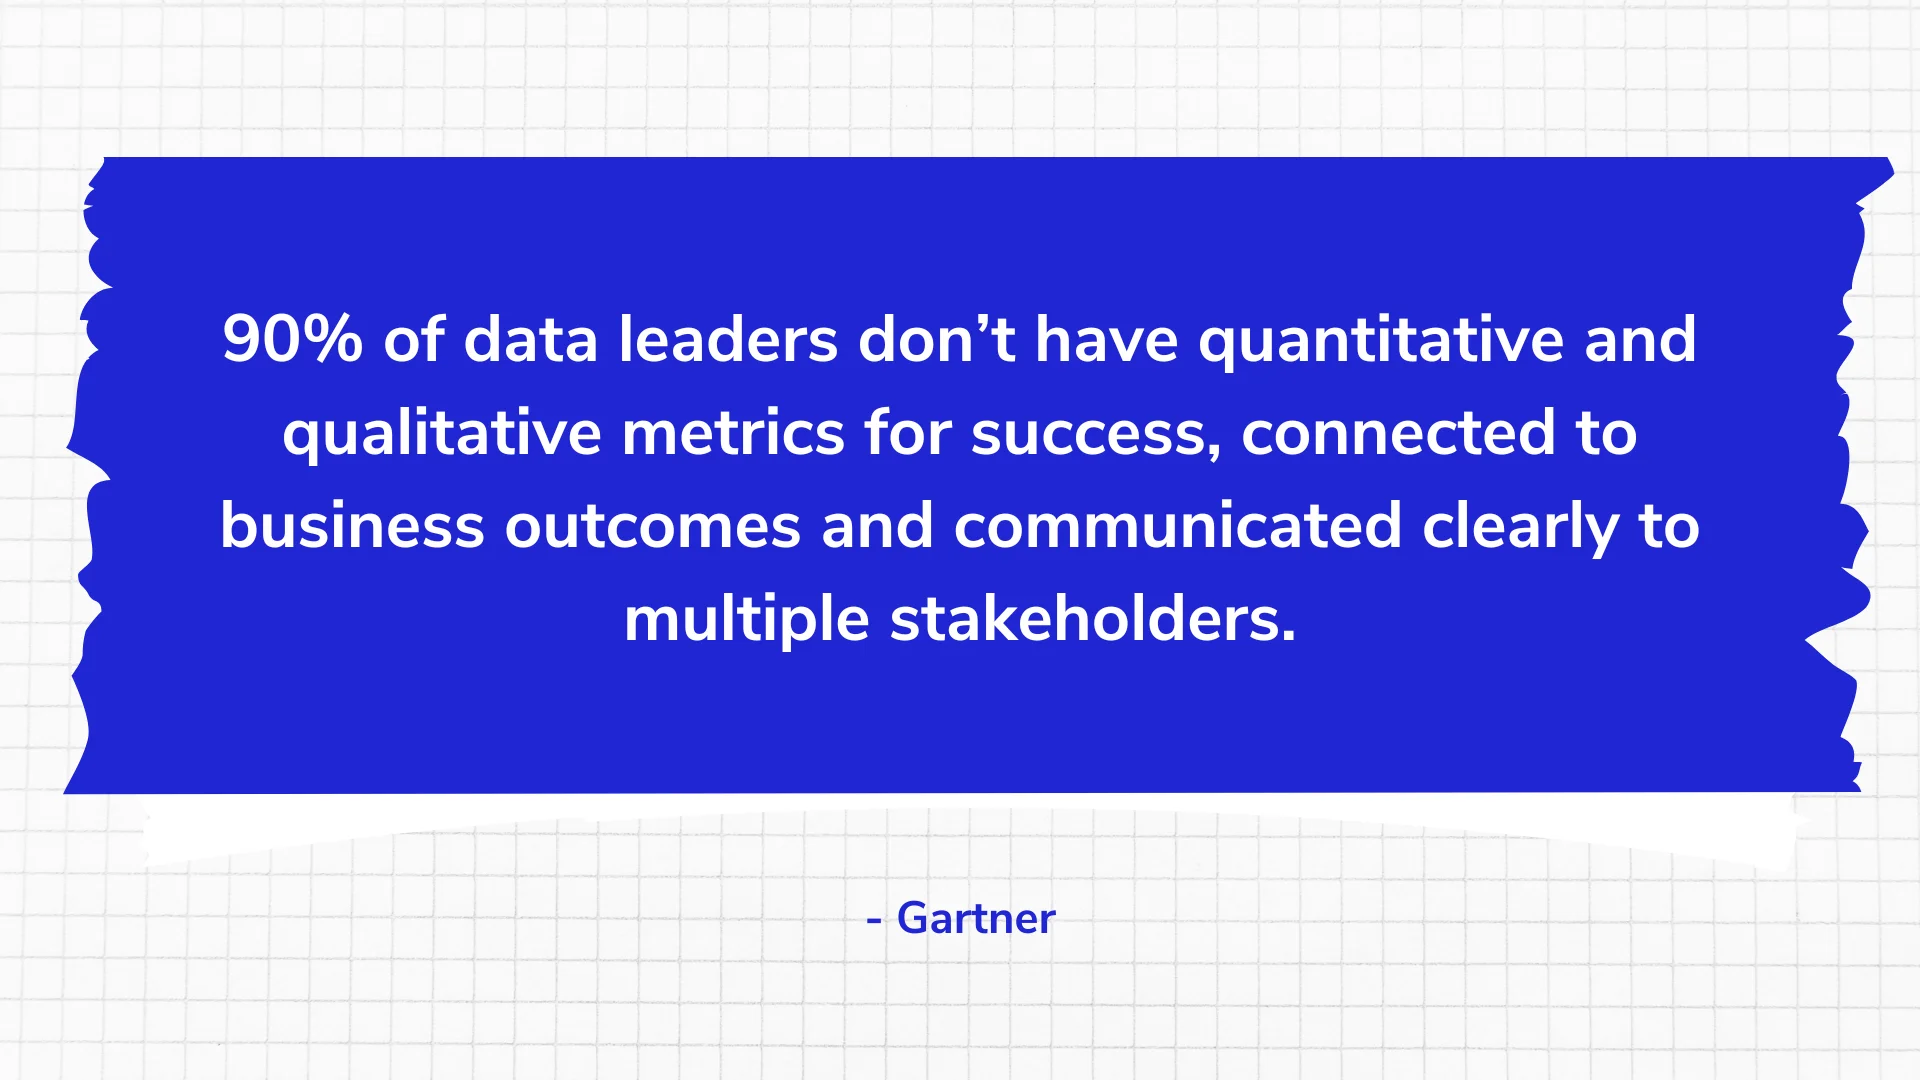 90% of data leaders don’t have quantitative and qualitative metrics for success, connected to business outcomes and communicated clearly to multiple stakeholders